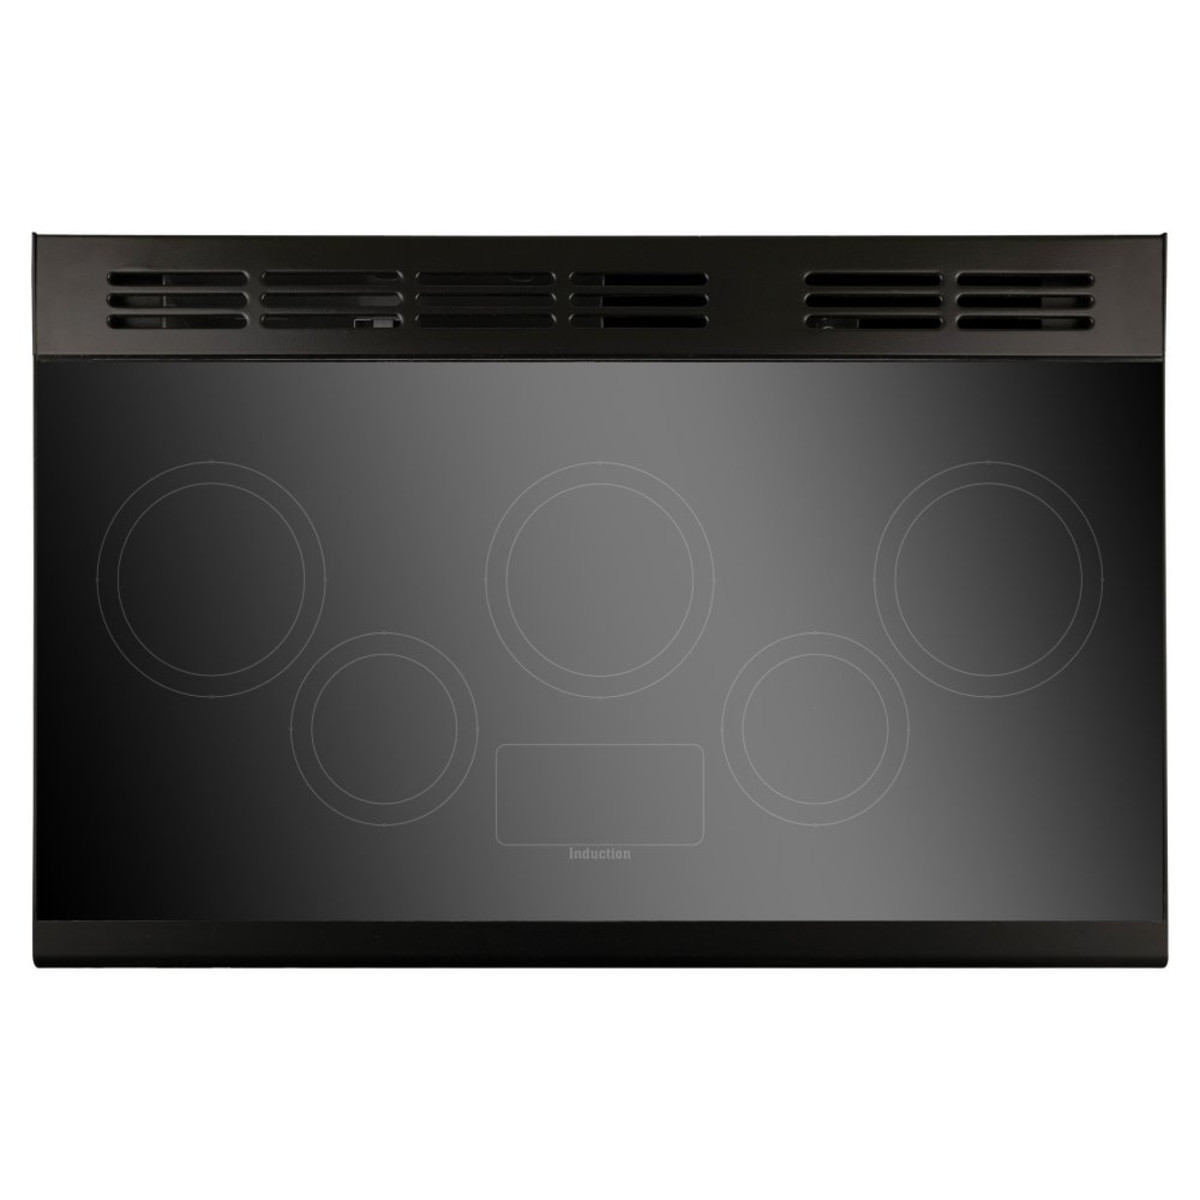 Rangemaster CDL90EICB/C CLASSIC DELUXE 90cm Induction Cooker, Charcoal Black